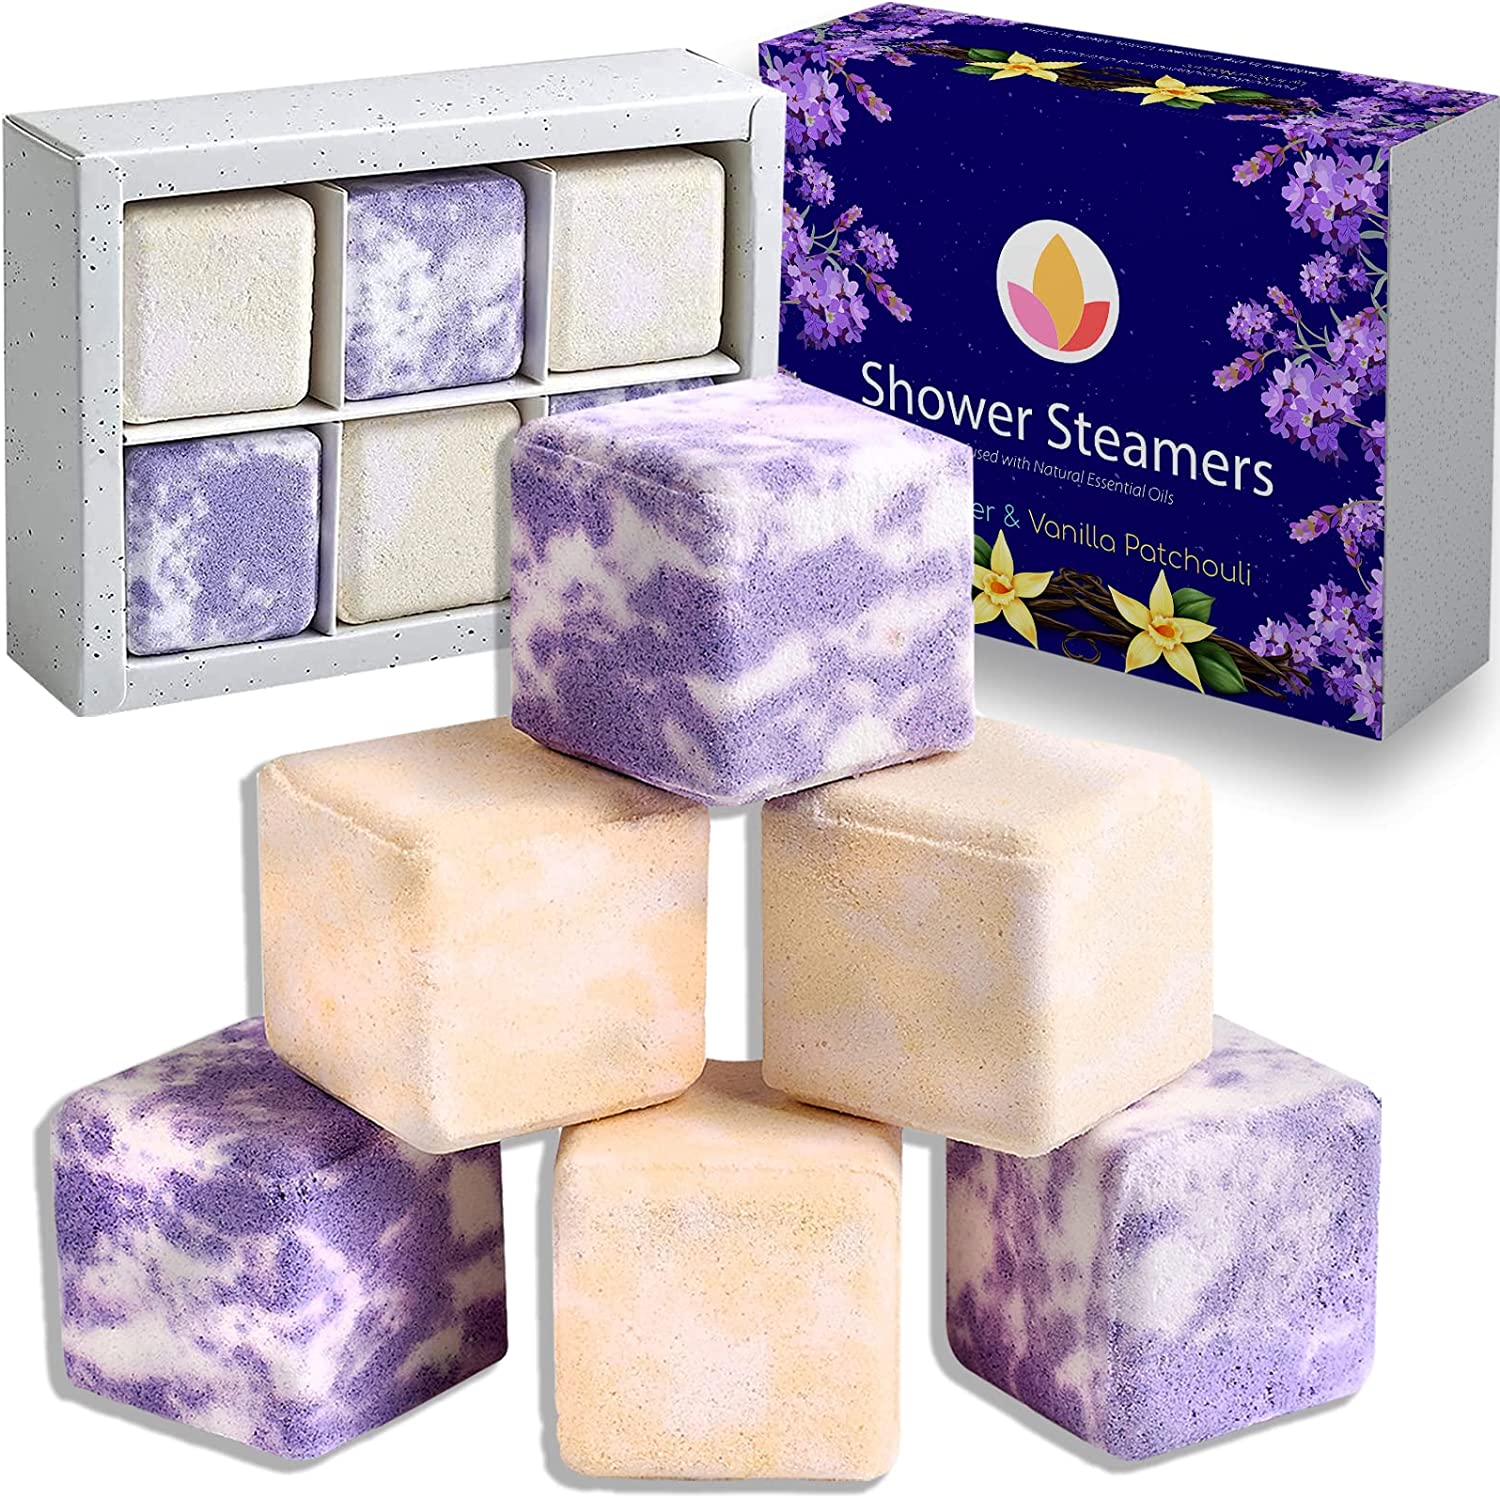 Lavender Shower Steamers Aromatherapy Relaxing Spa Gifts